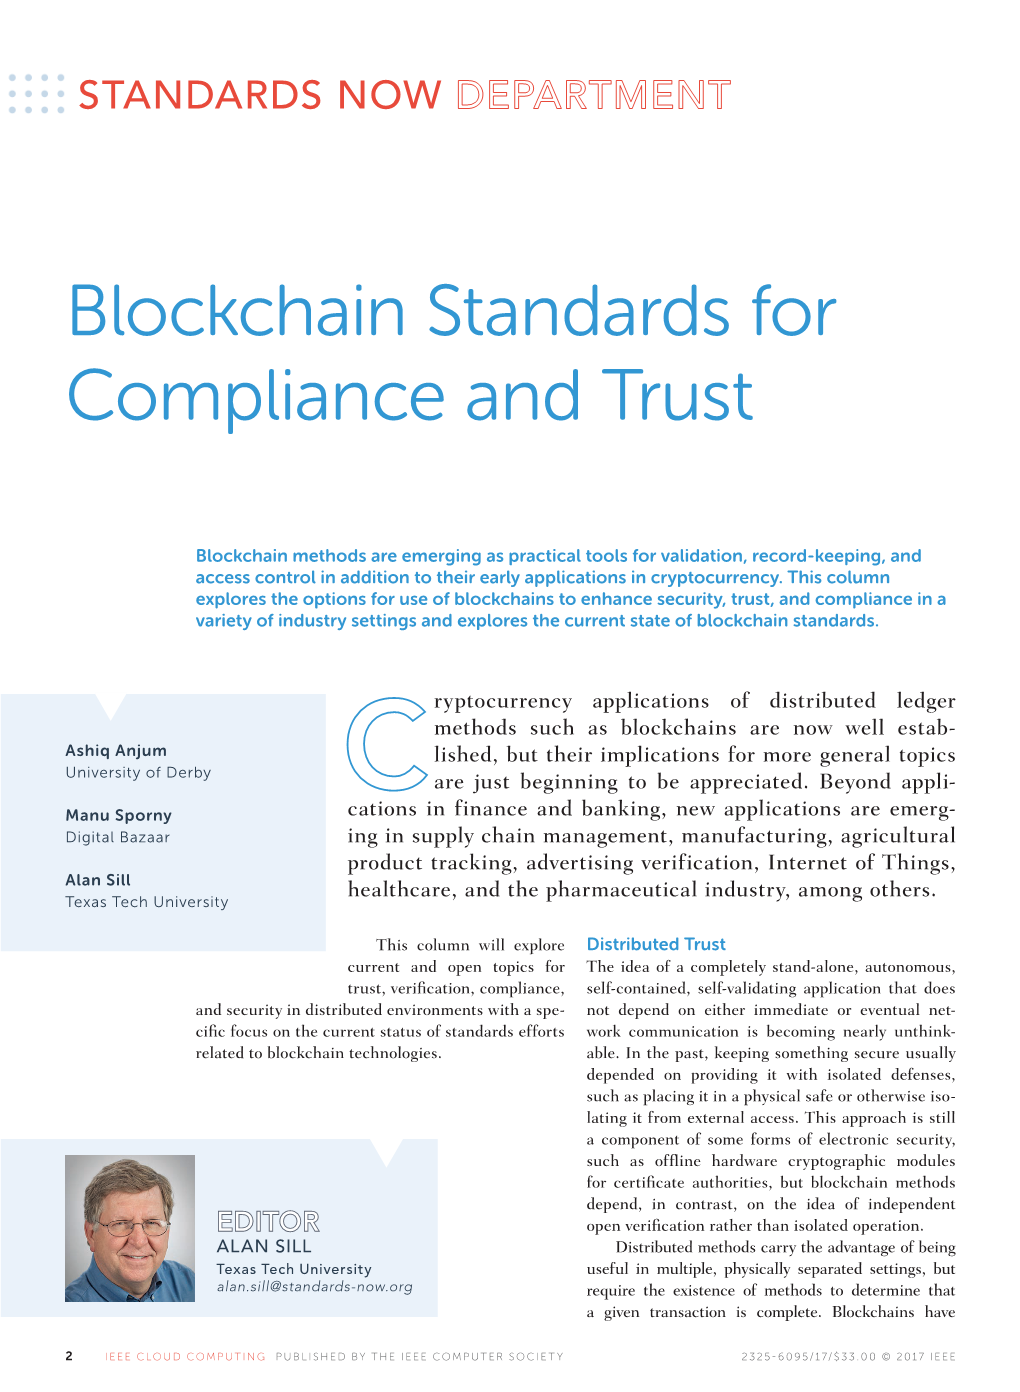 Blockchain Standards for Compliance and Trust